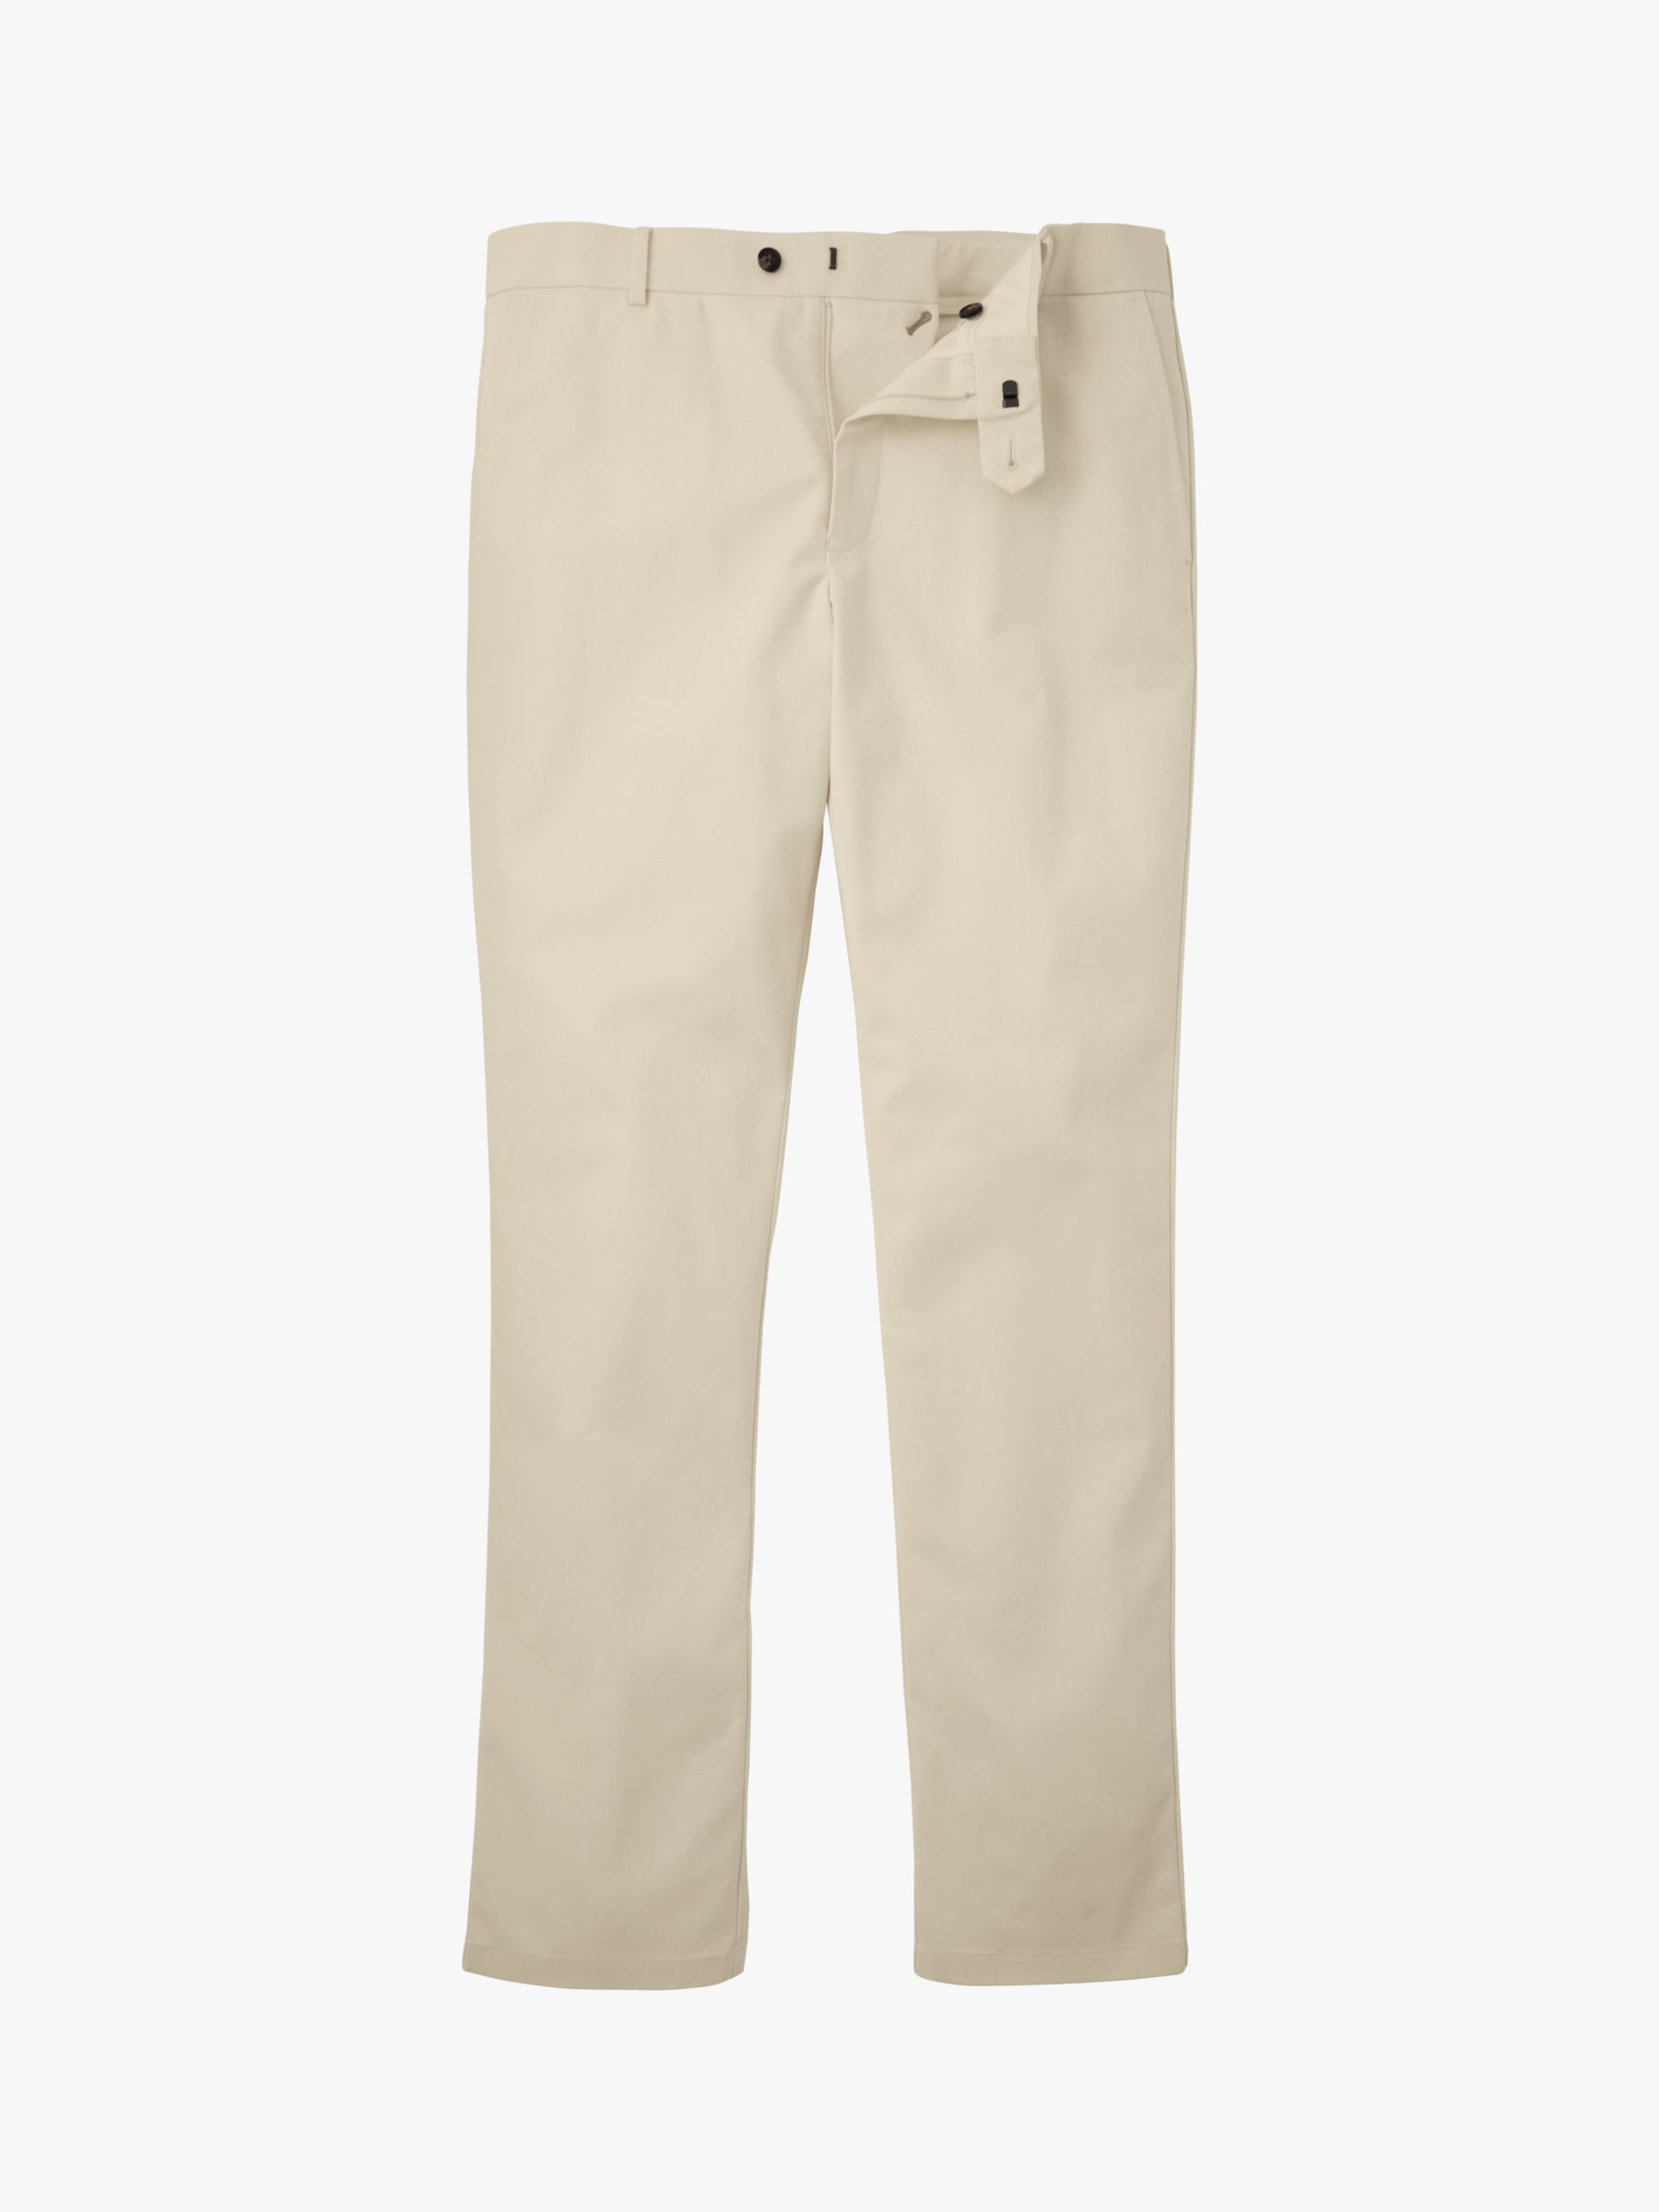 Charles Tyrwhitt Classic Fit Ultimate Non-Iron Chinos, Ivory, W32/L30